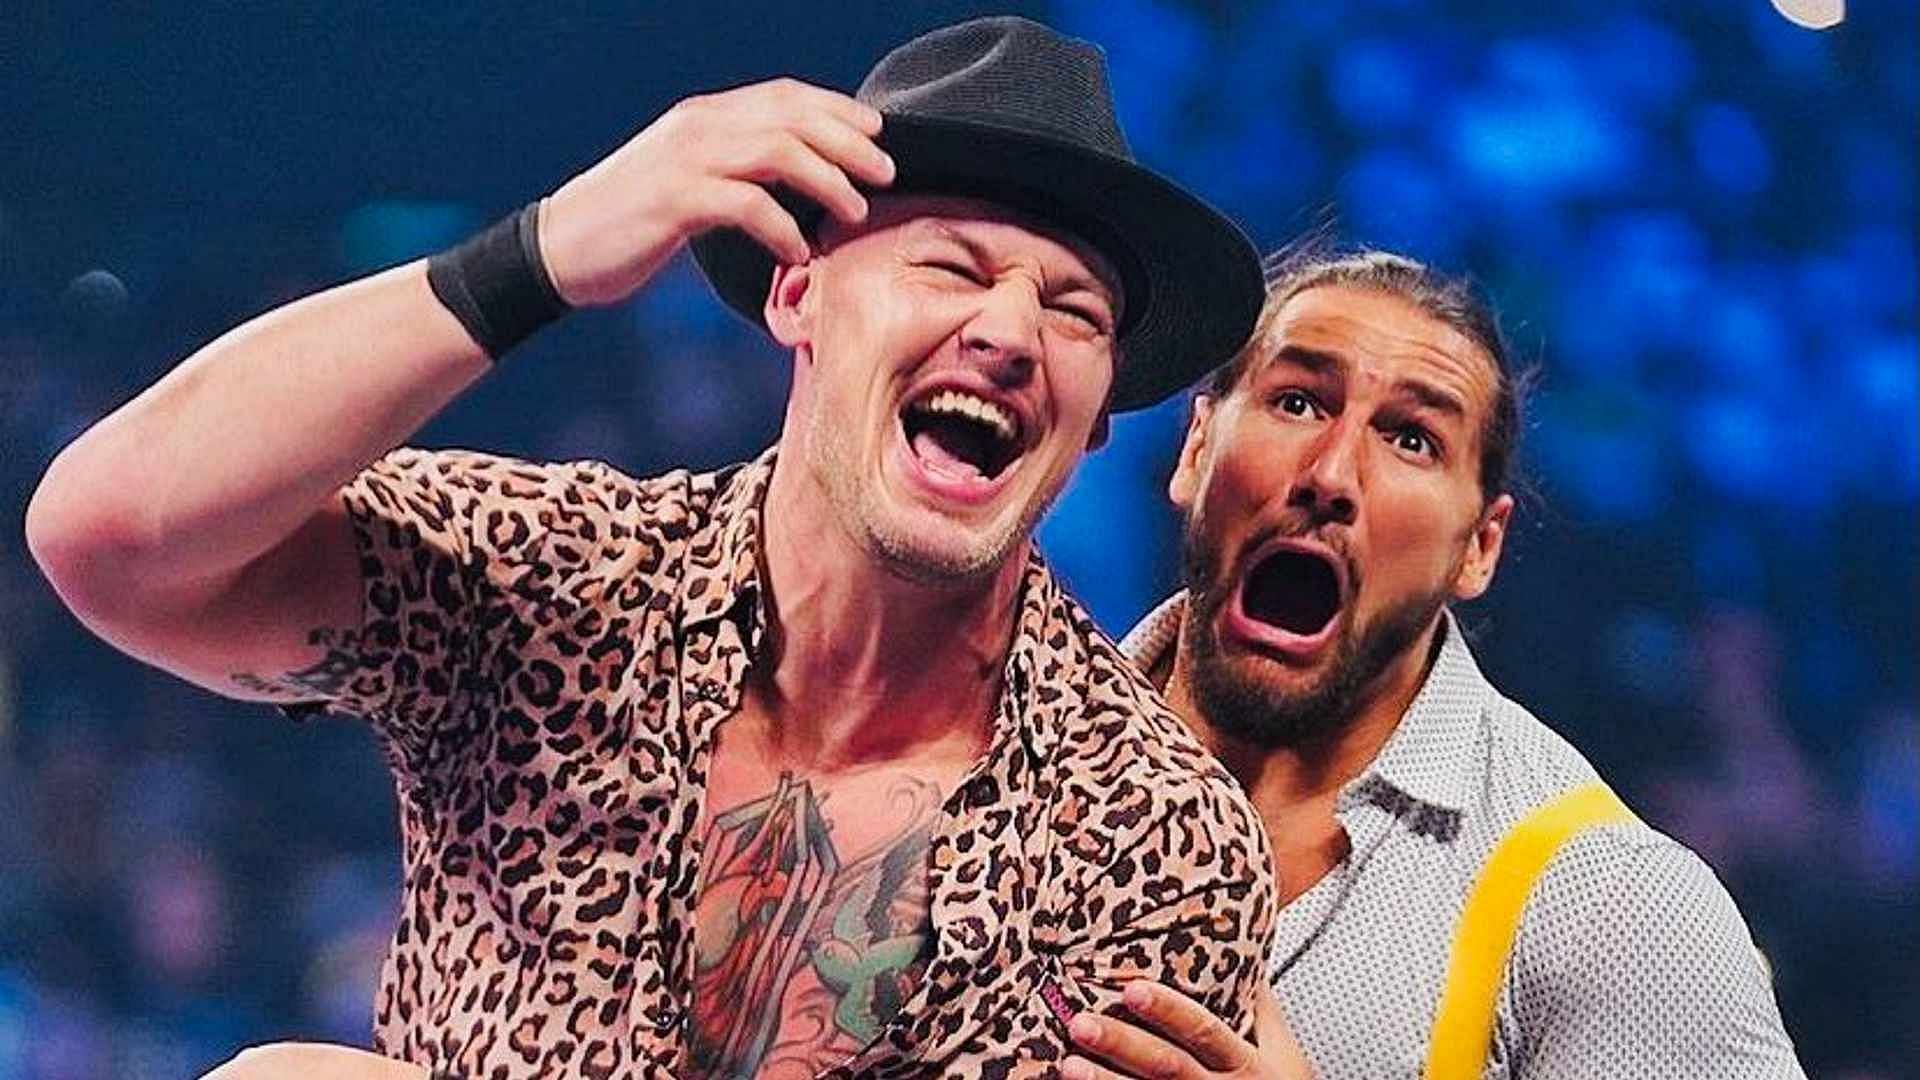 Happy Corbin and Madcap Moss on SmackDown